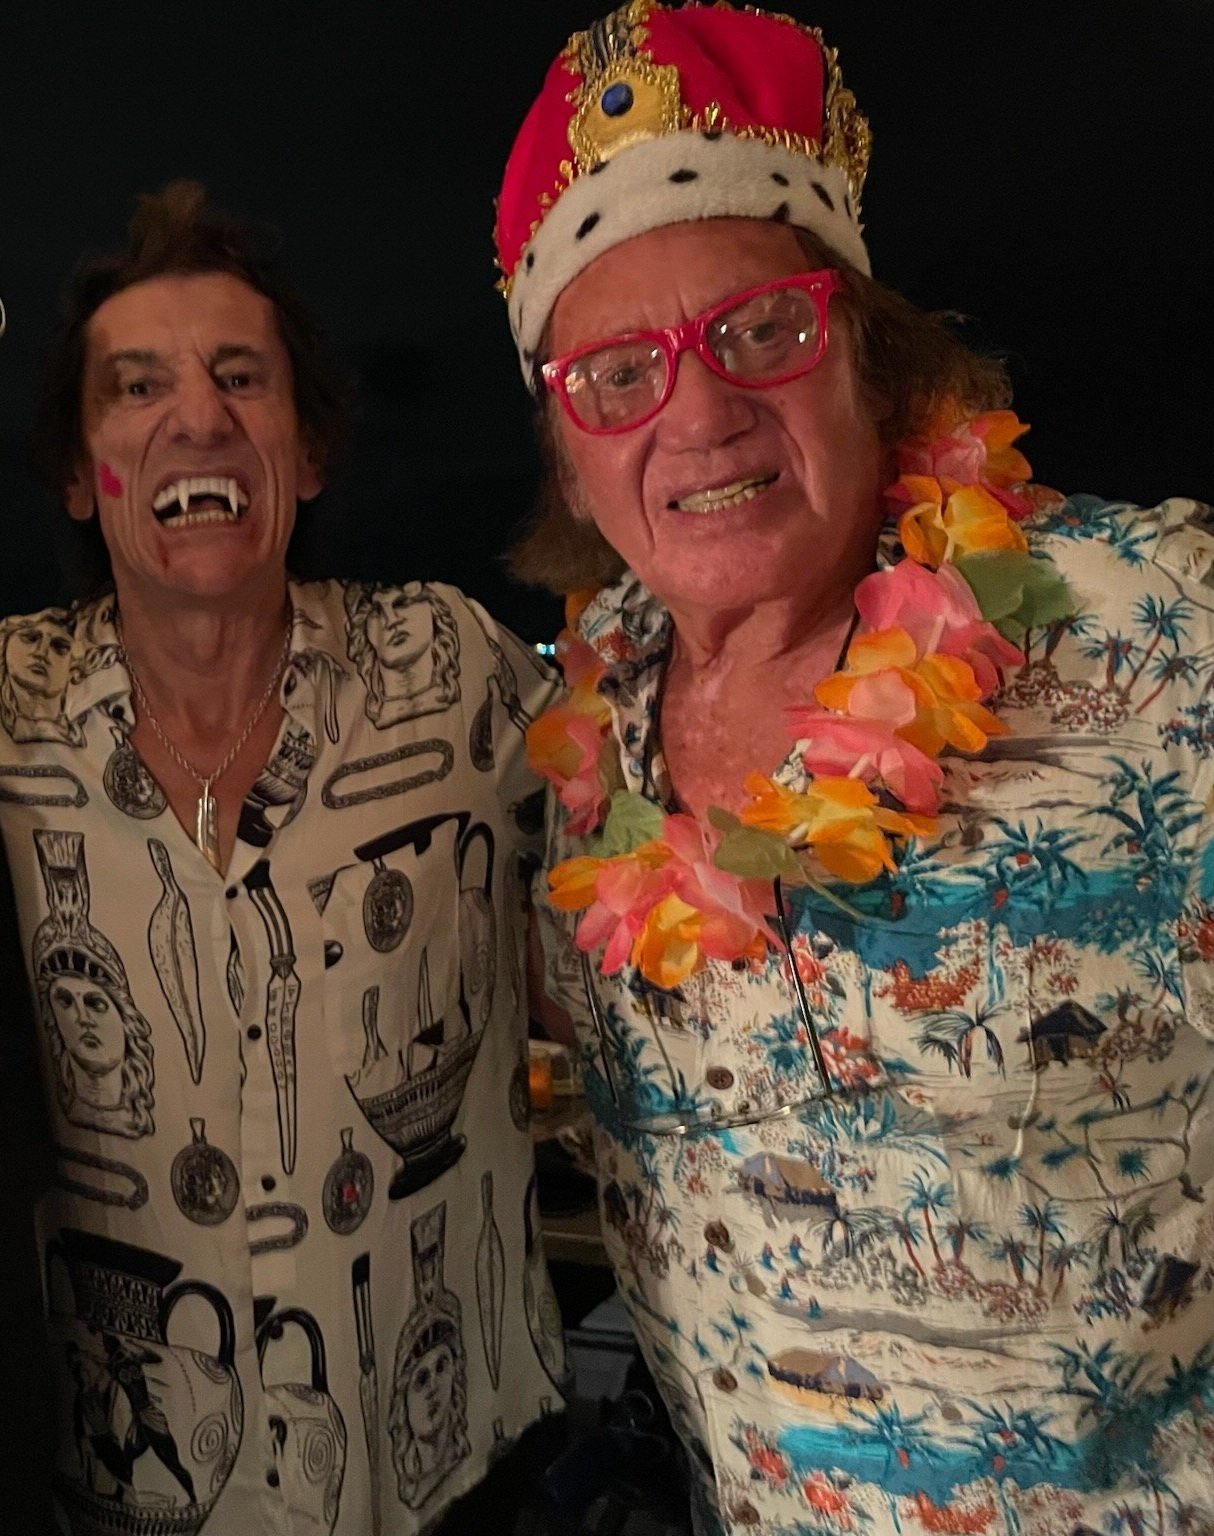  This photo is a celebration at a Halloween party with Dickie on the right and guitarist Ronnie Woods on the left. 